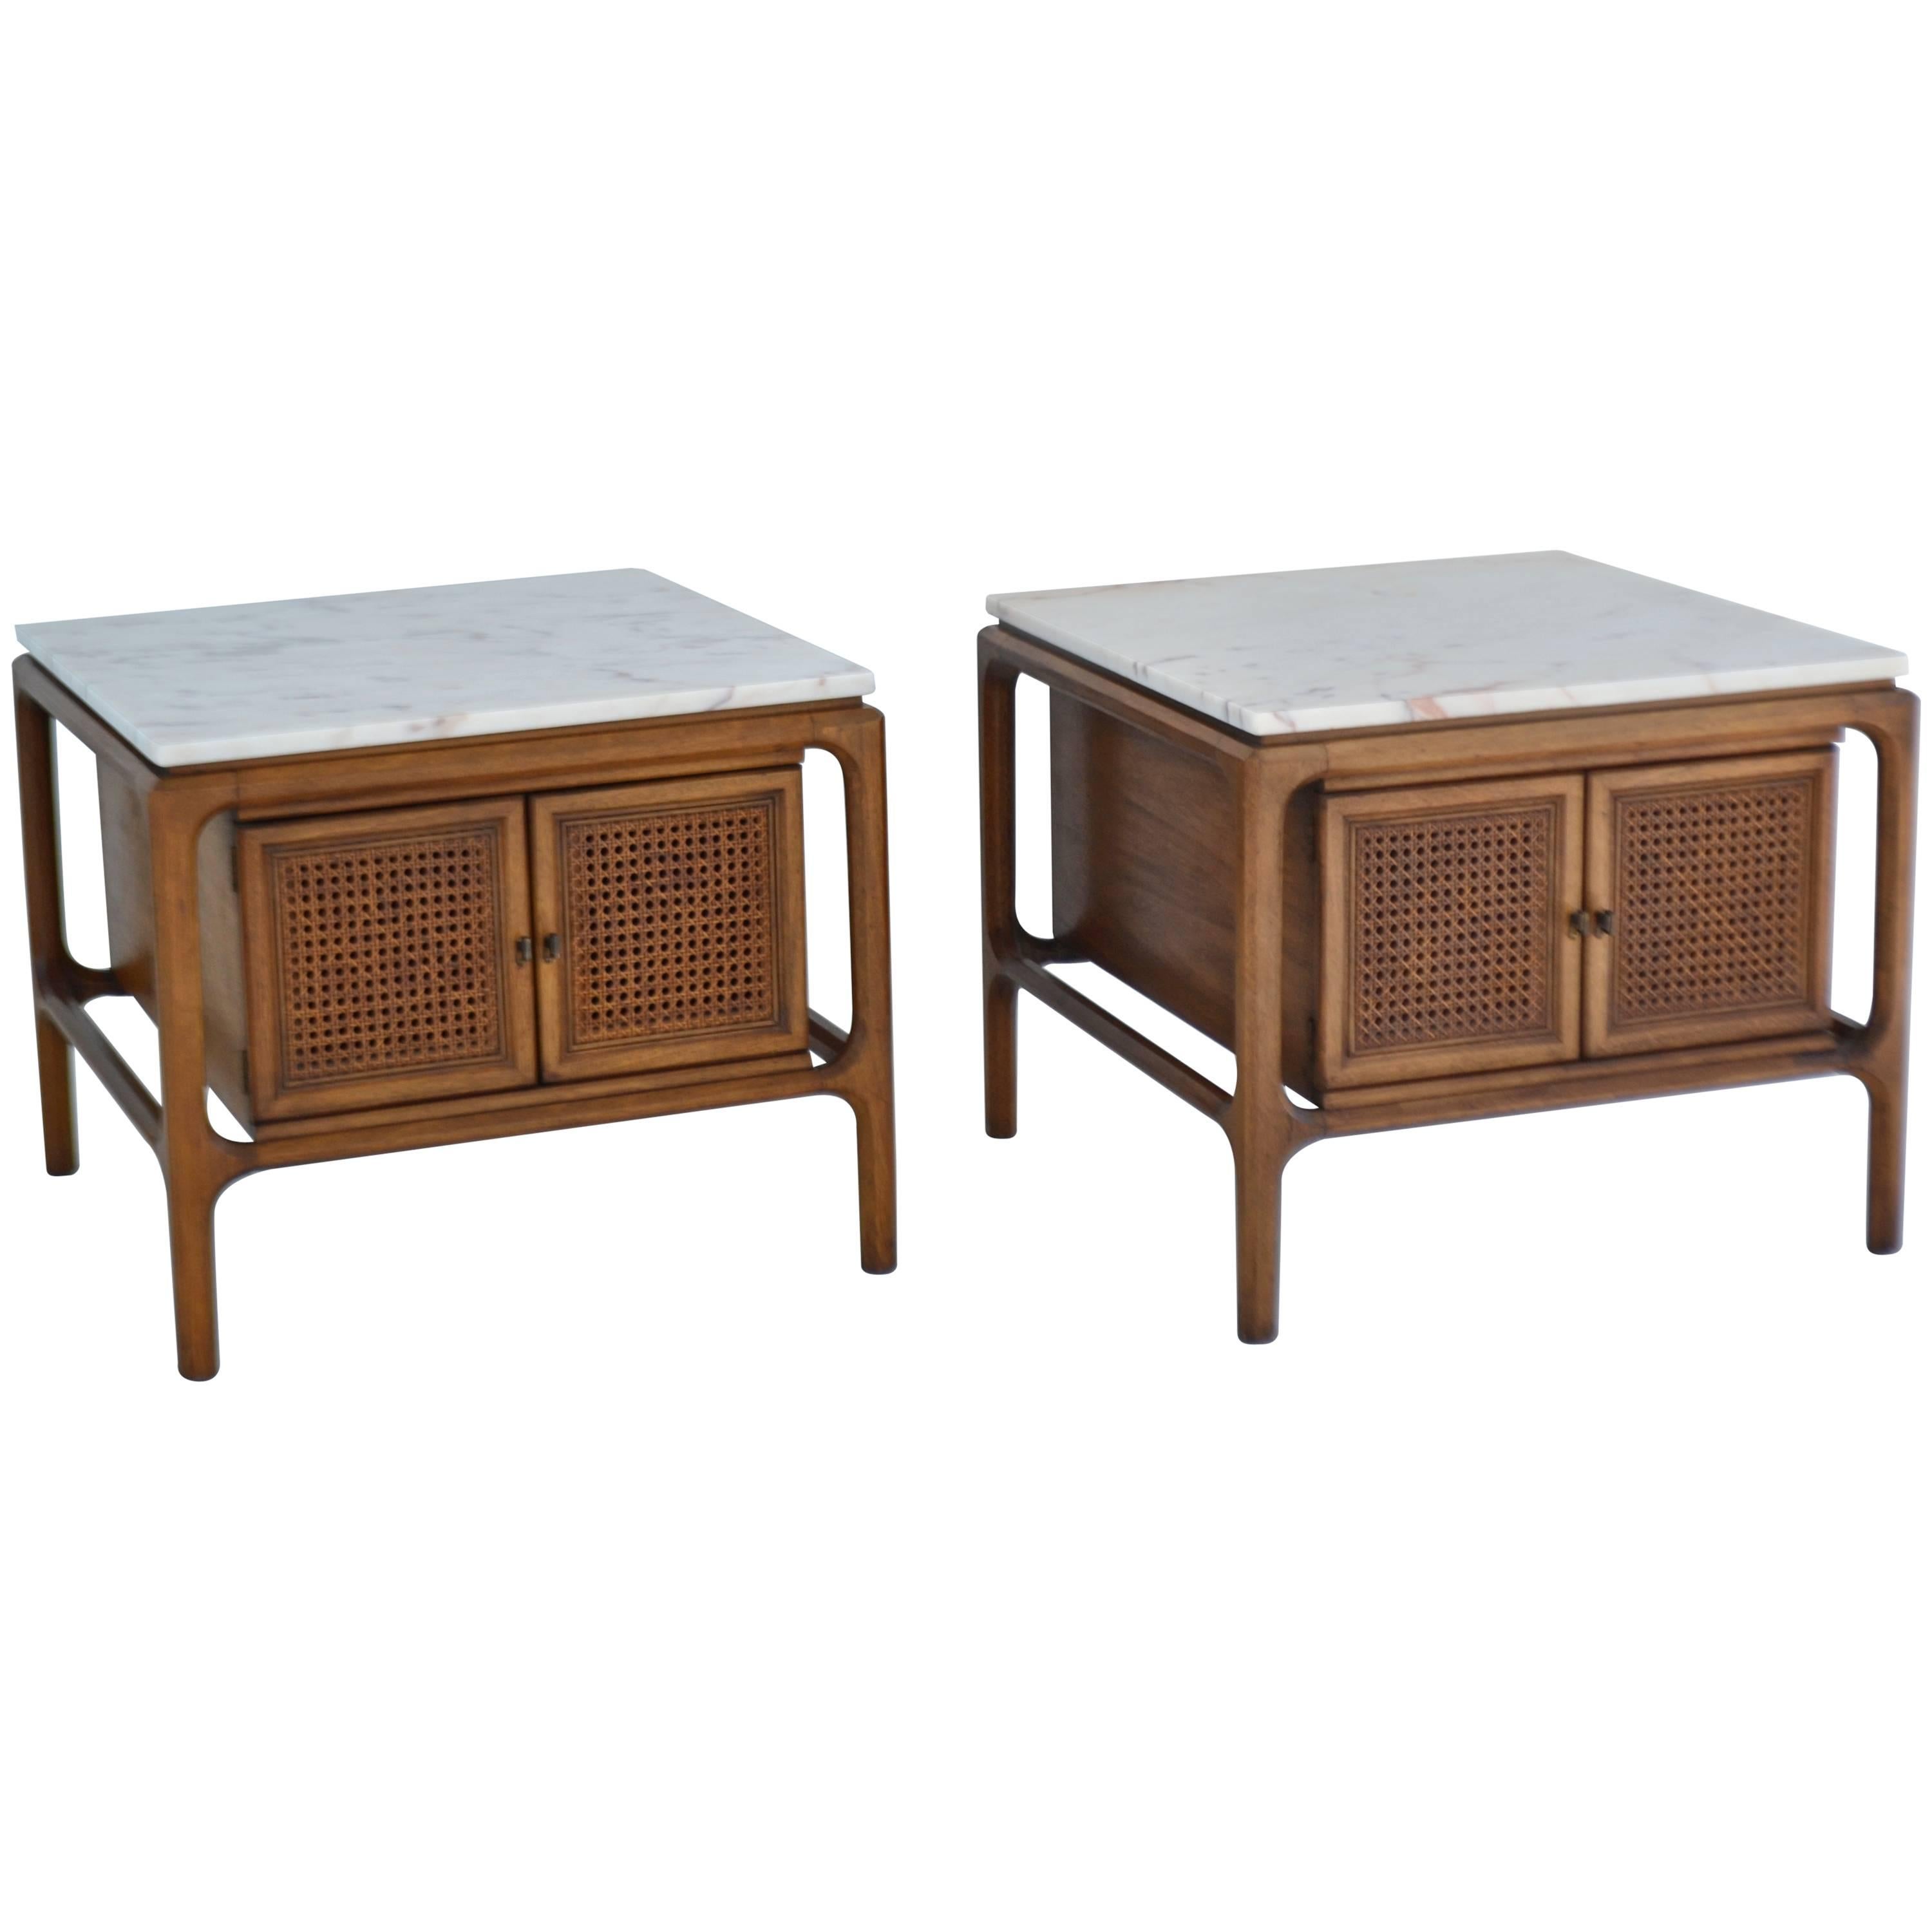 Pair of Sculptural Walnut and Marble Side Tables